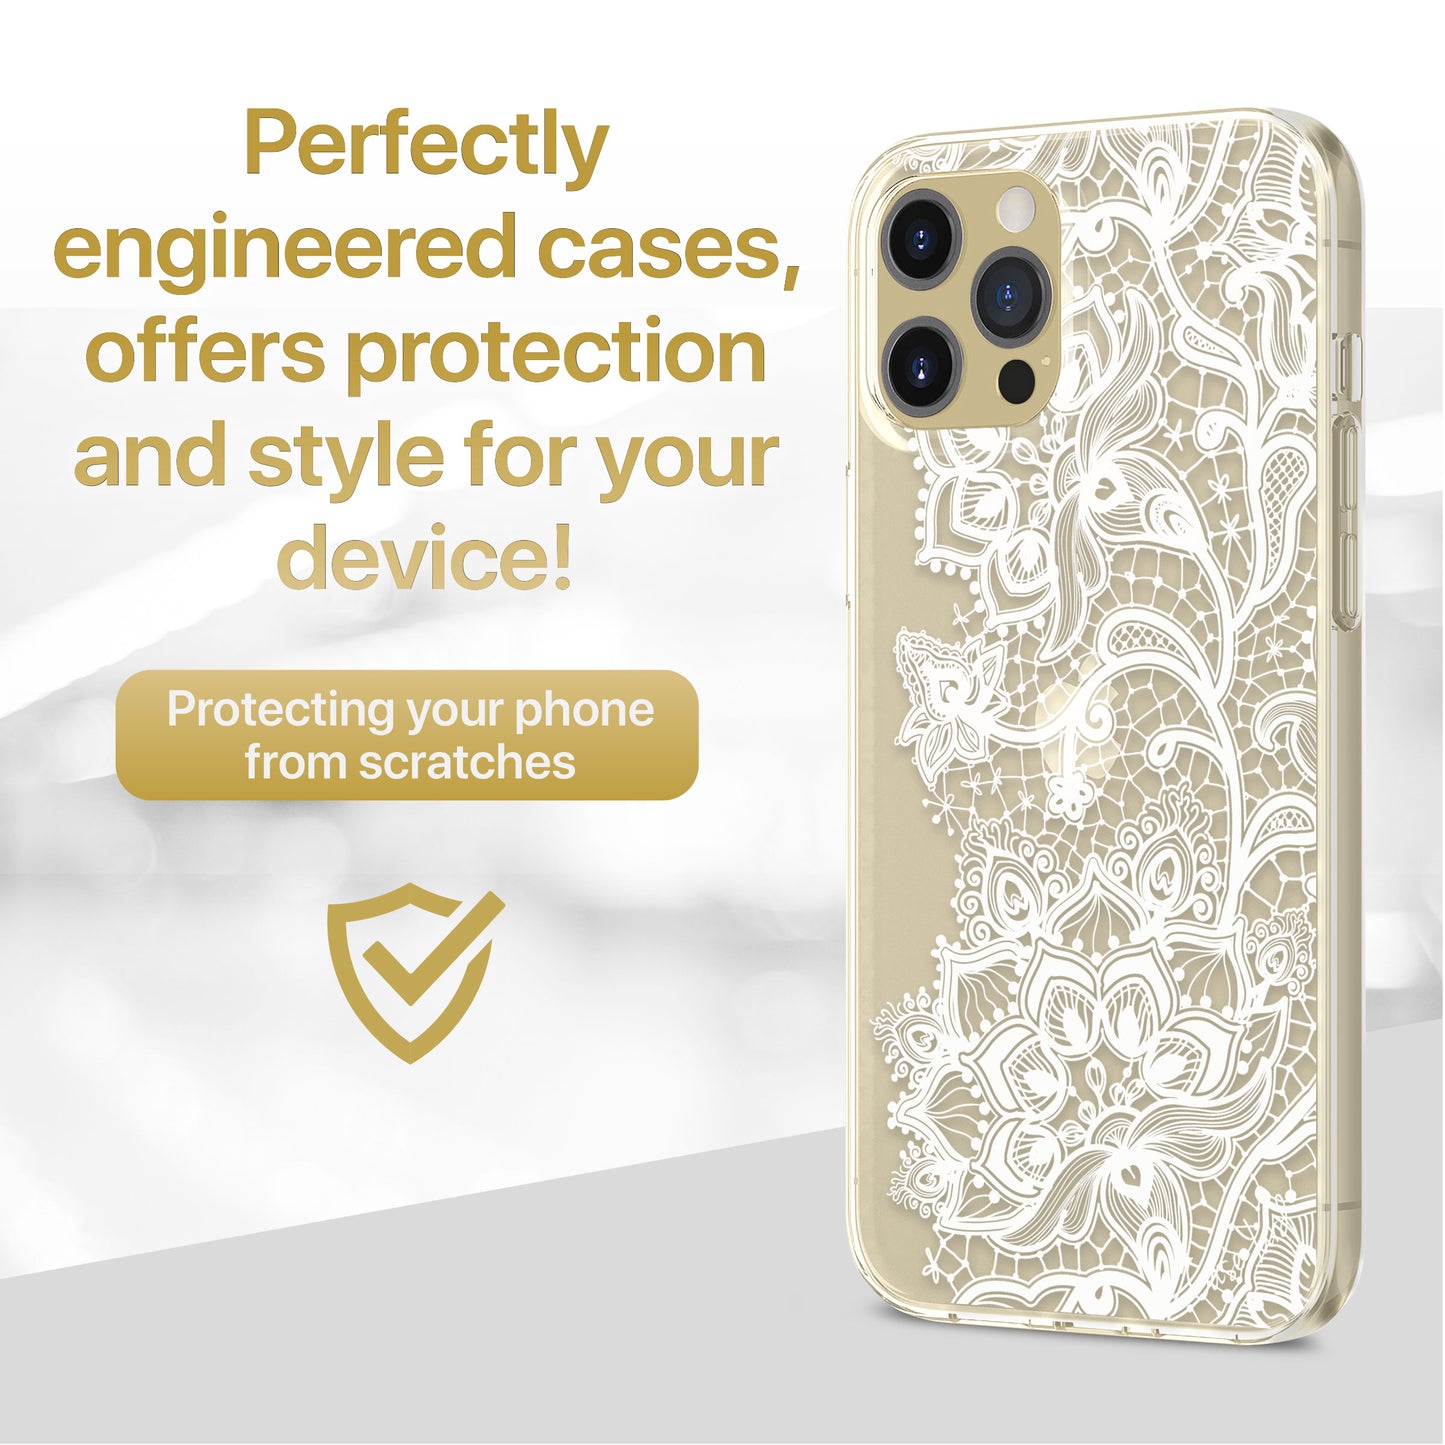 TPU Clear case with (Lace Dolly) Design for iPhone & Samsung Phones